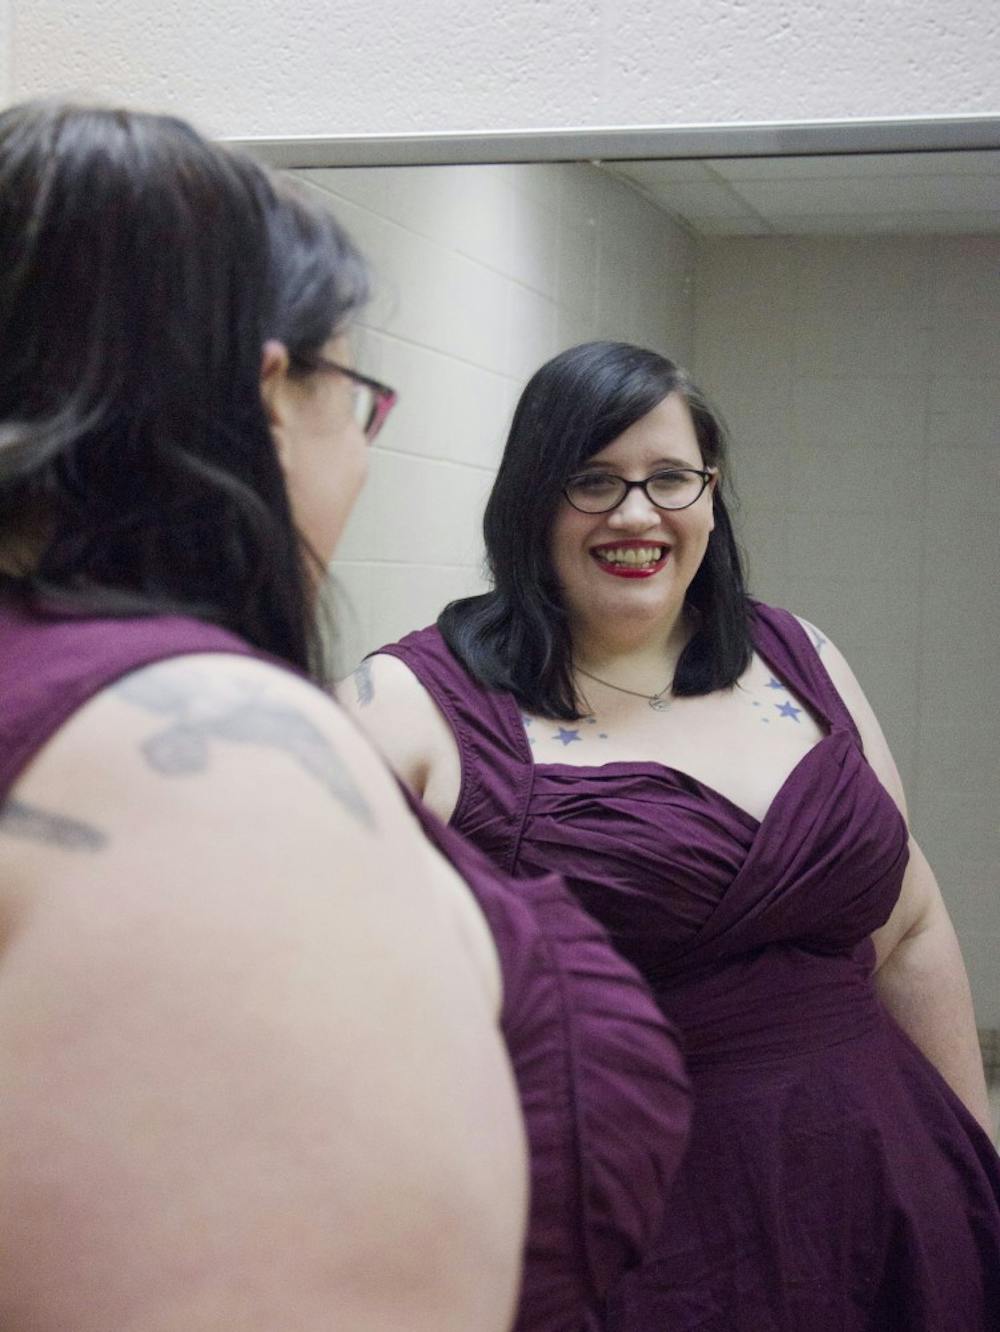 <p>Sarah Hollowell, a senior creative writing major, wanted to take the body-positivity moment a step further by talking about her sexual experiences as an overweight woman. DN PHOTO BREANNA DAUGHERTY</p>